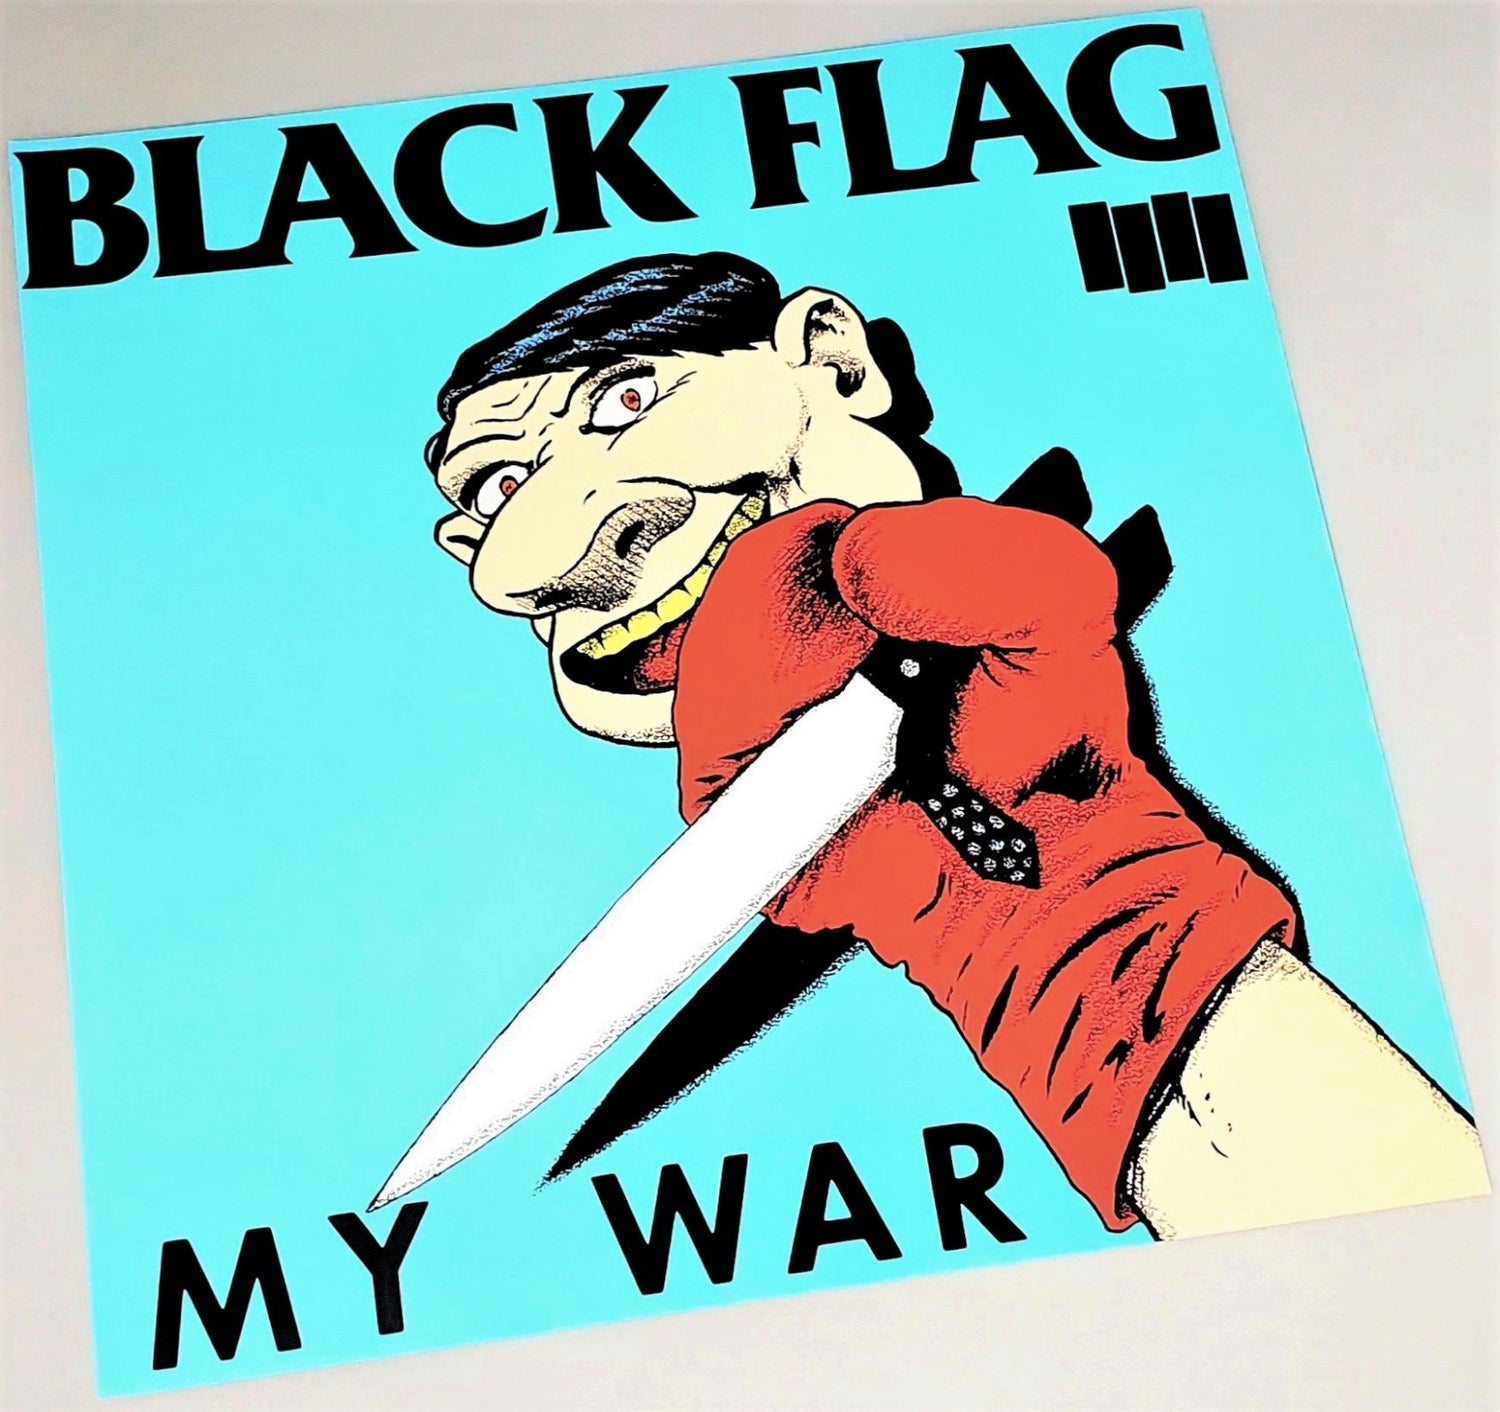 Black Flag 1984 My War cover original page art featured in 2017 Art Record Covers 